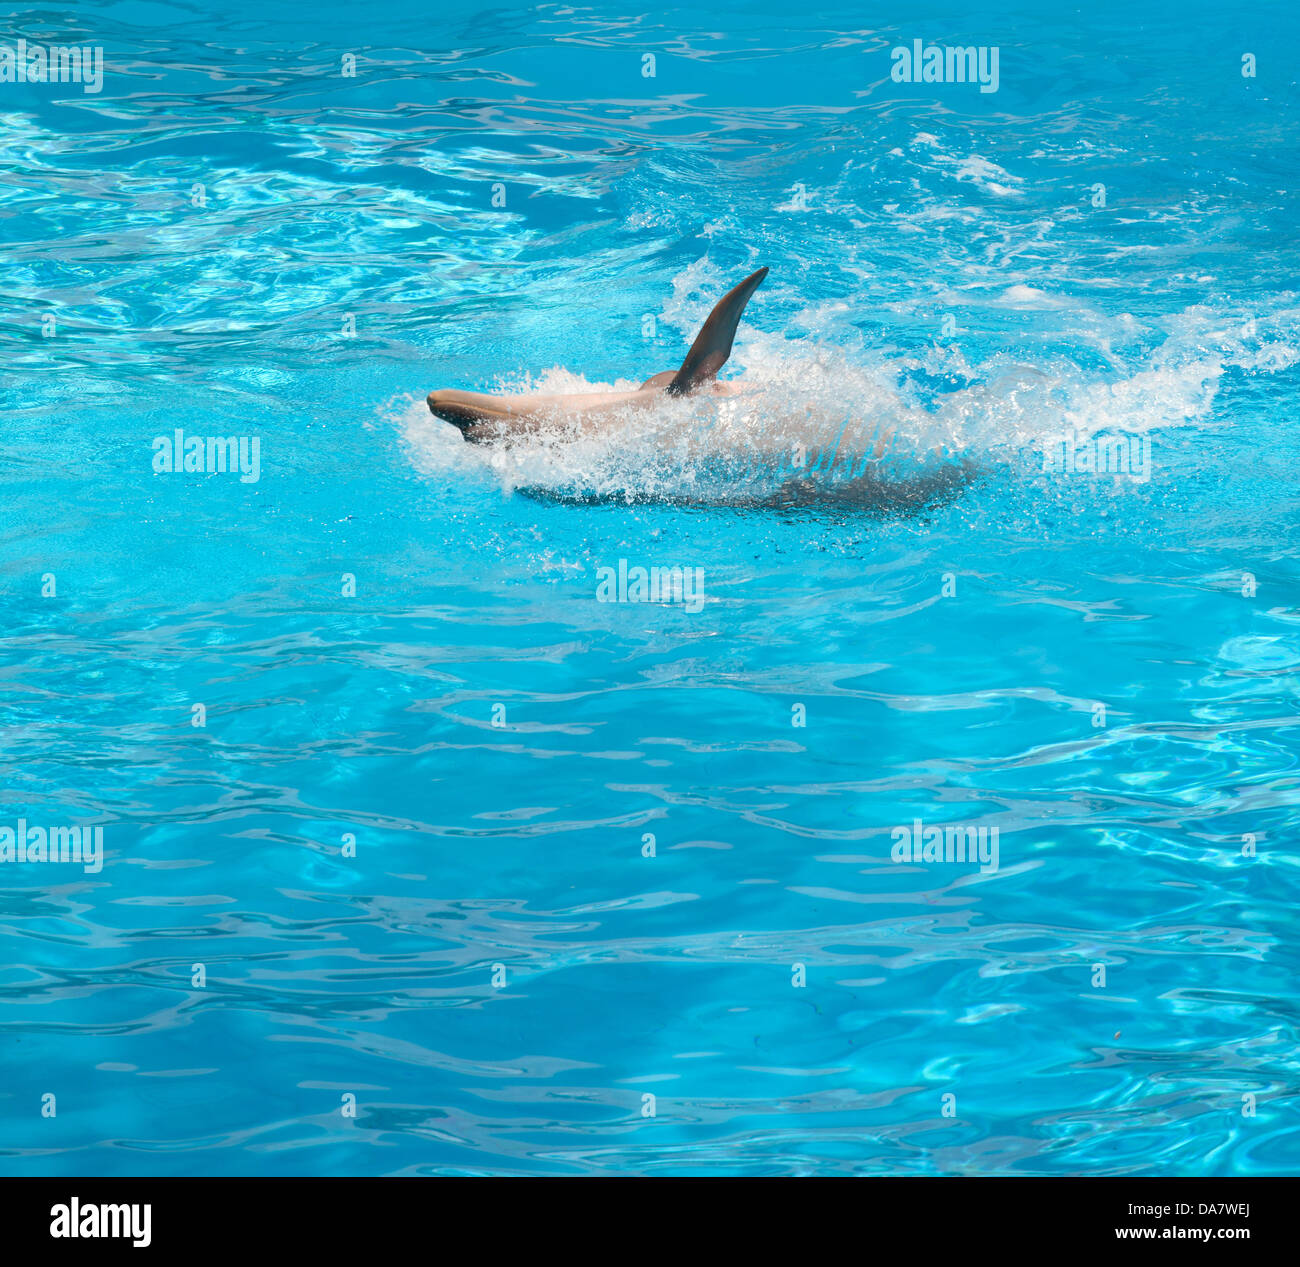 Dolphin jumping in the pool in supine position Stock Photo